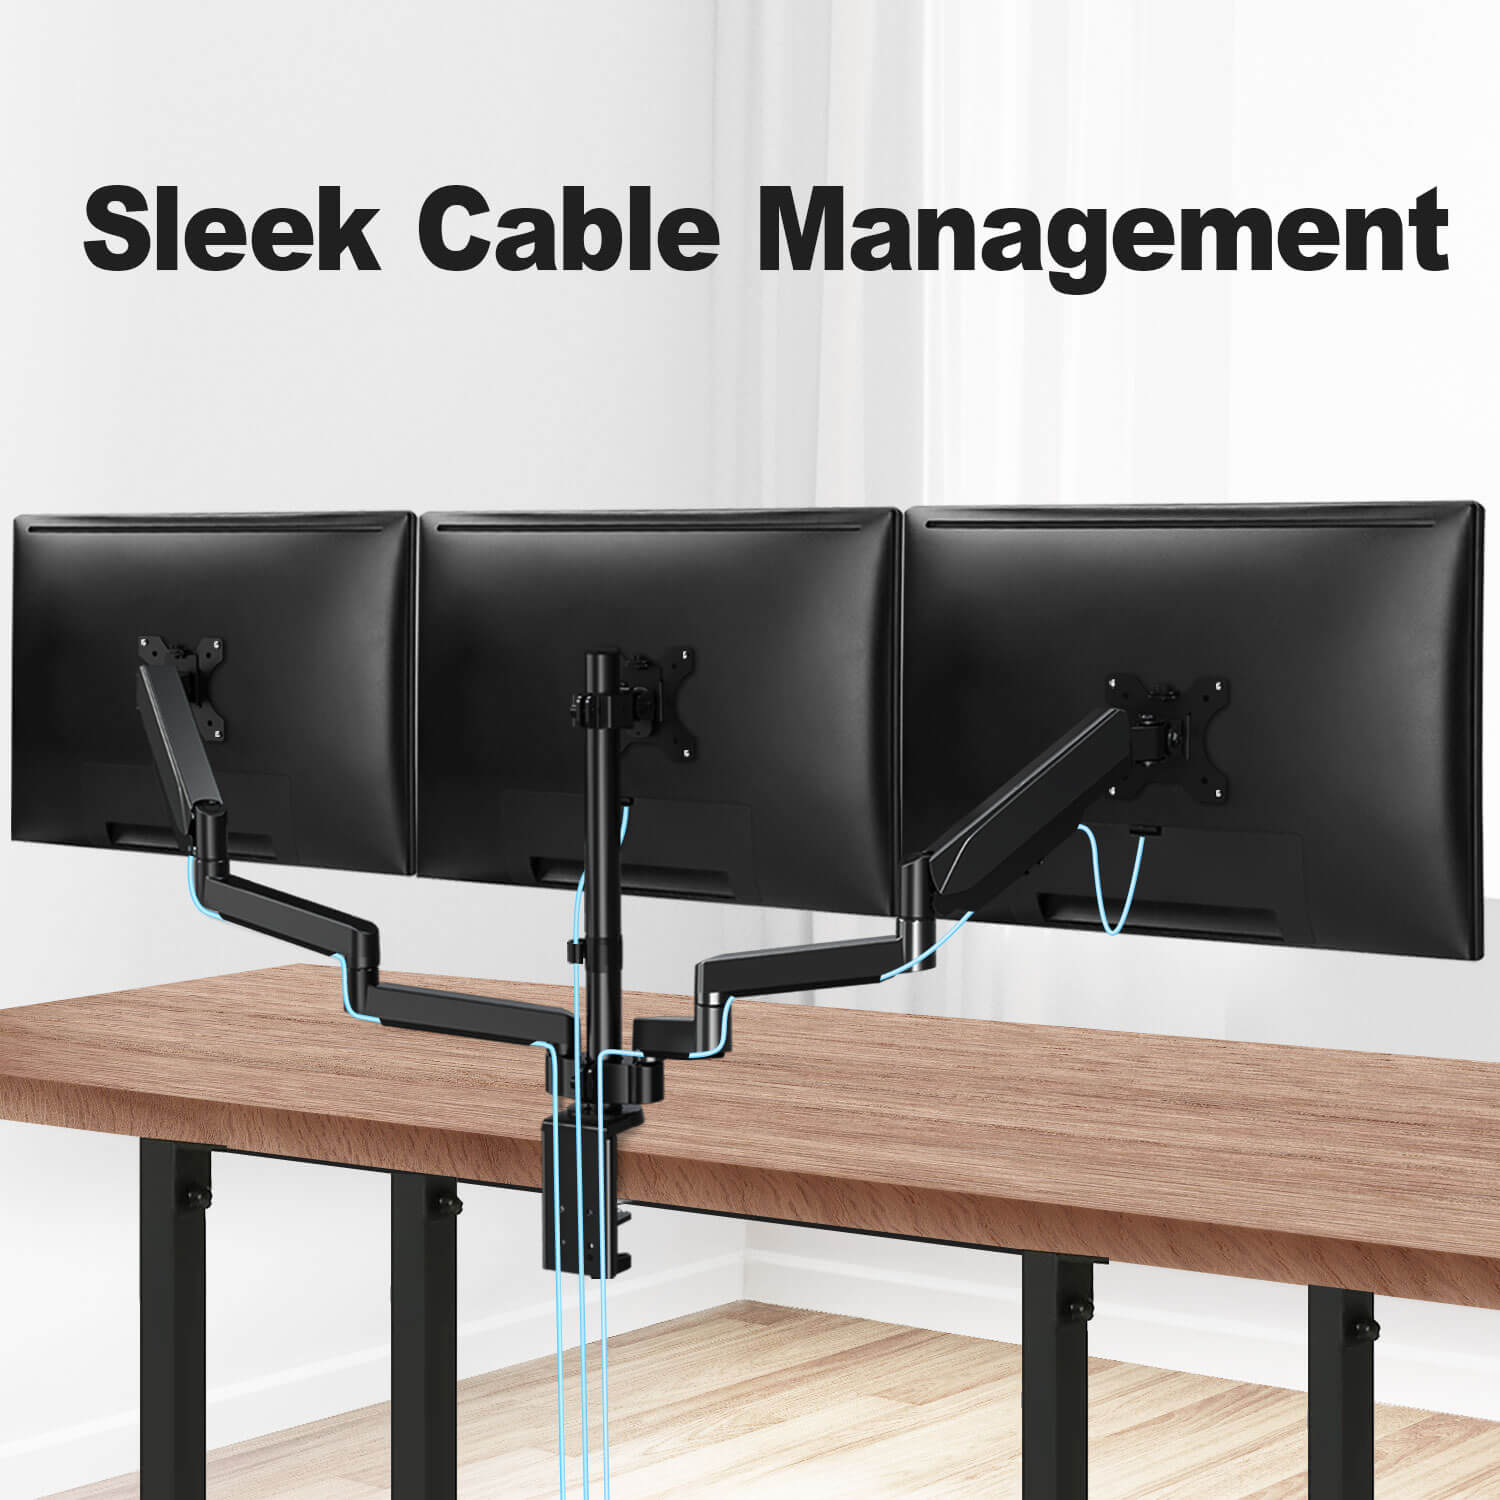 3 monitor mount with cable management